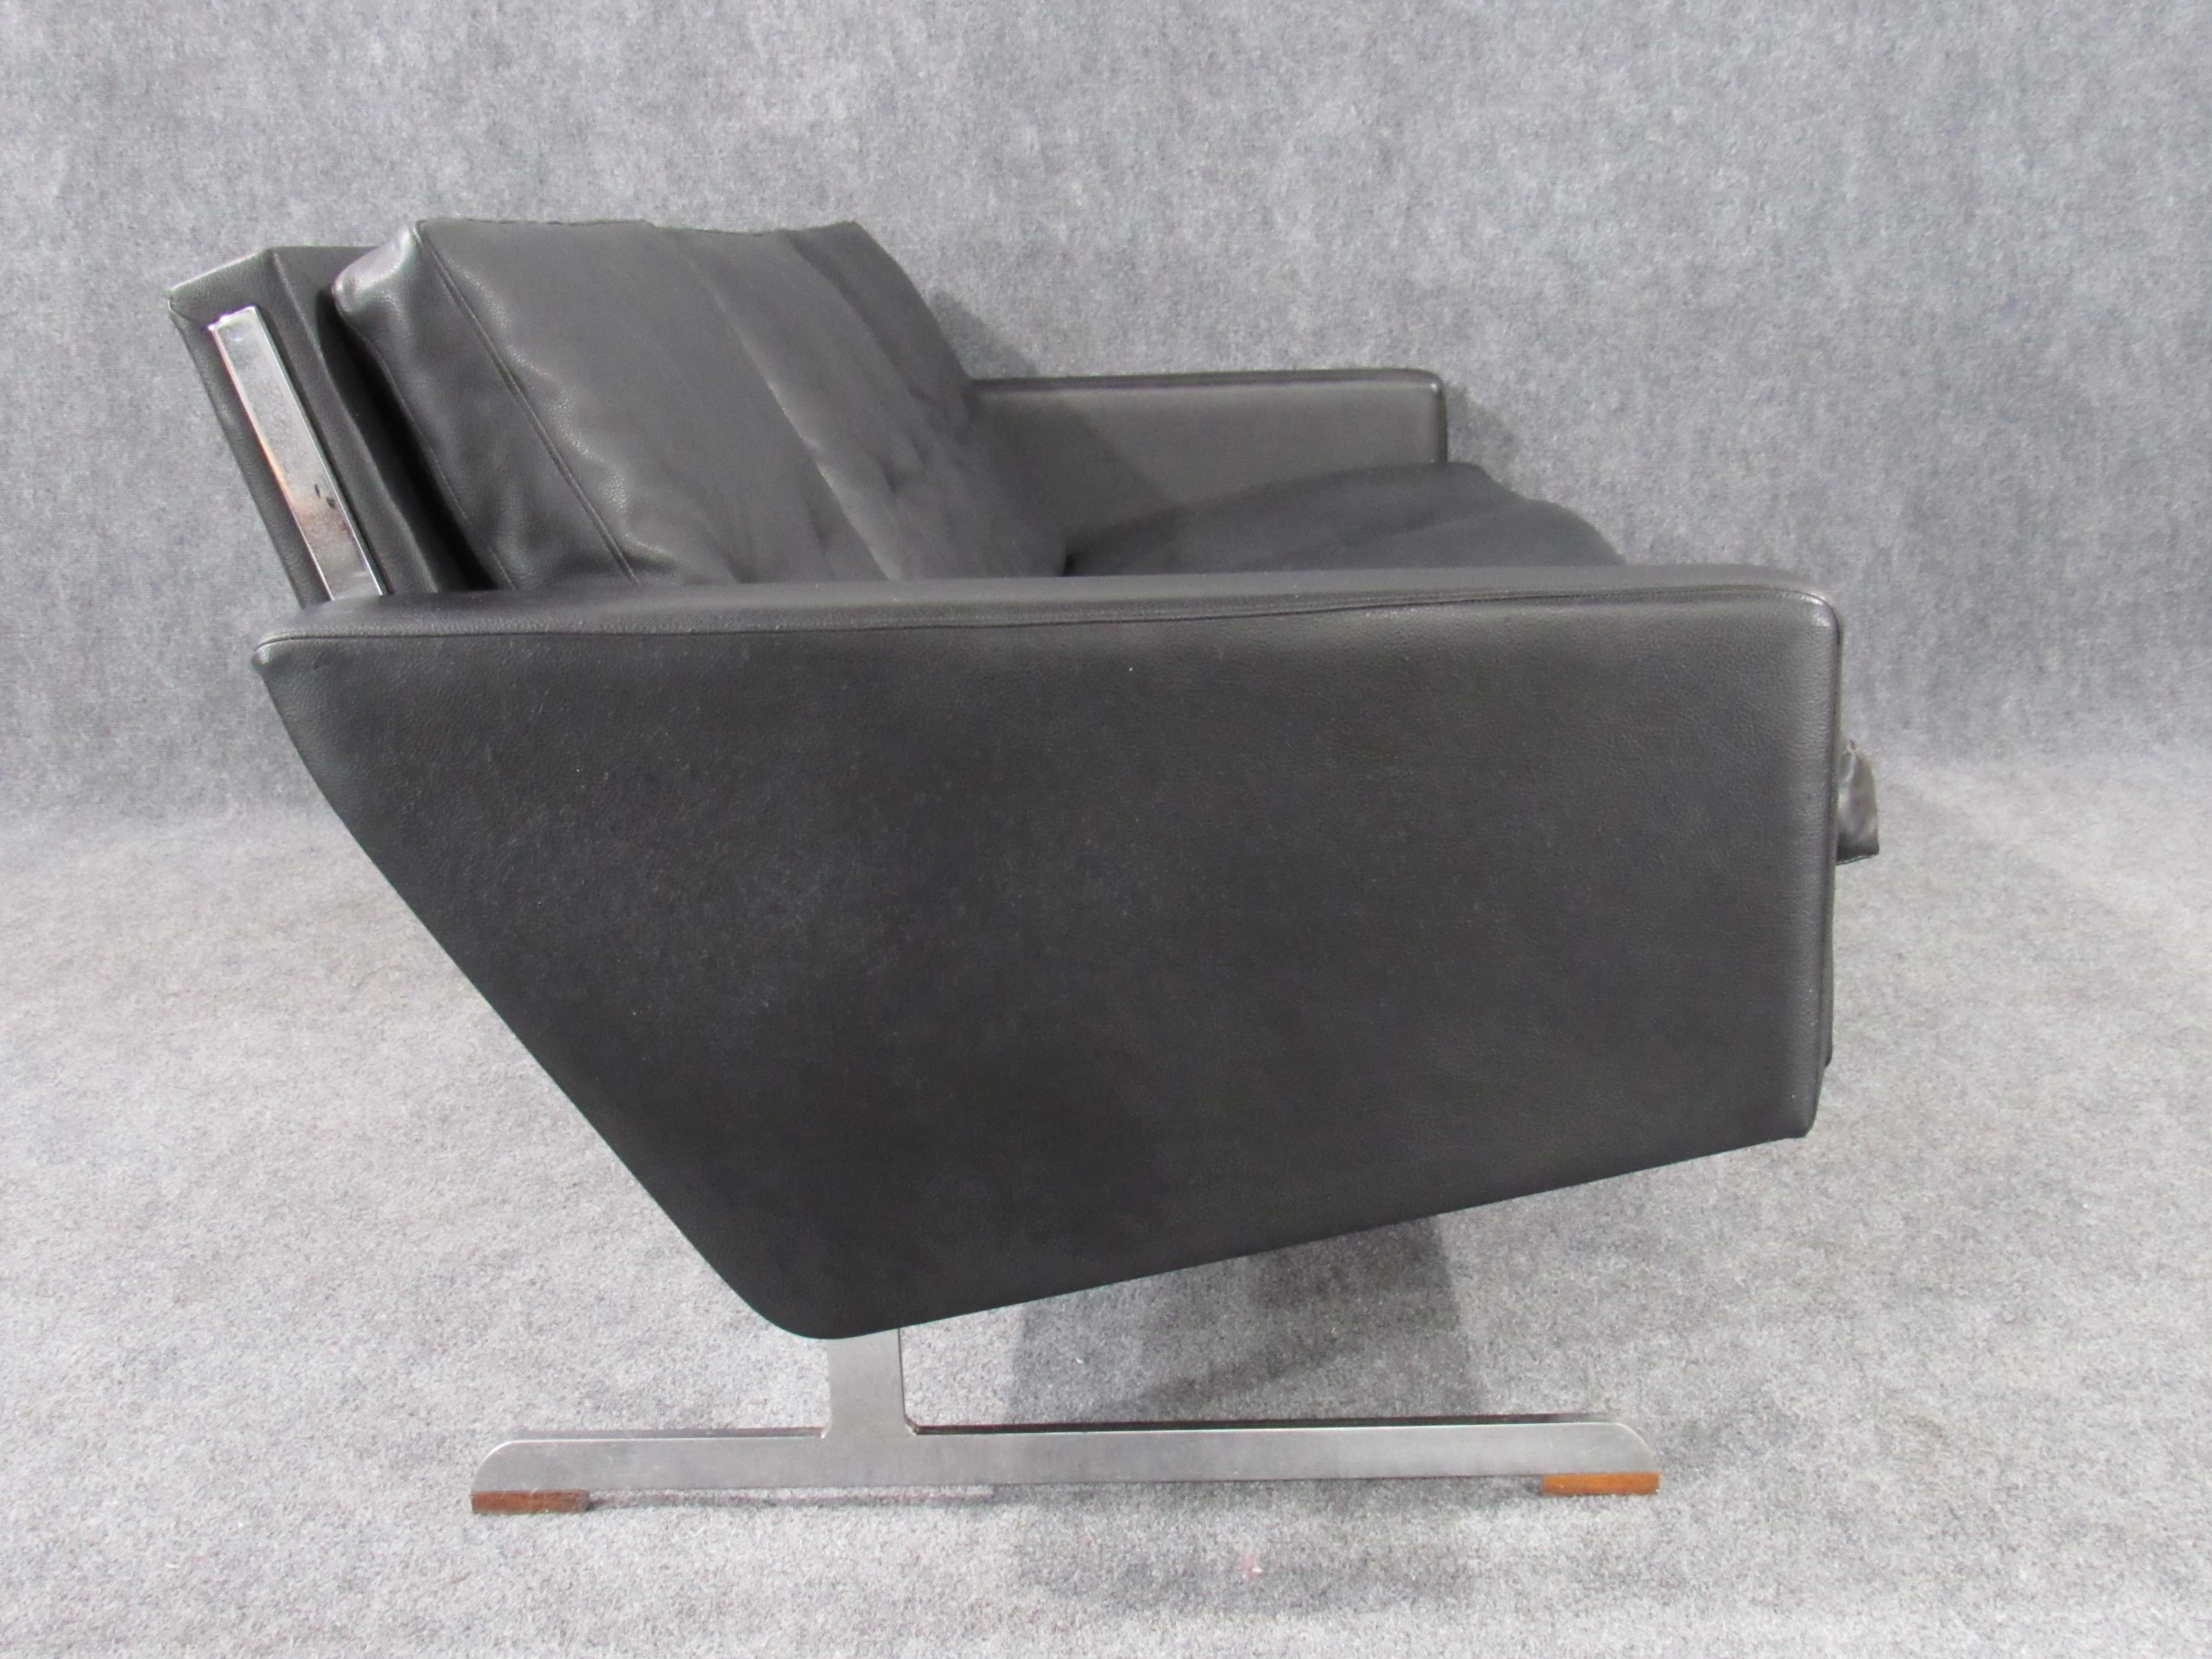 Late 20th Century Midcentury Danish Modern Sofa in Faux Black Leather Attributed to Georg Thams